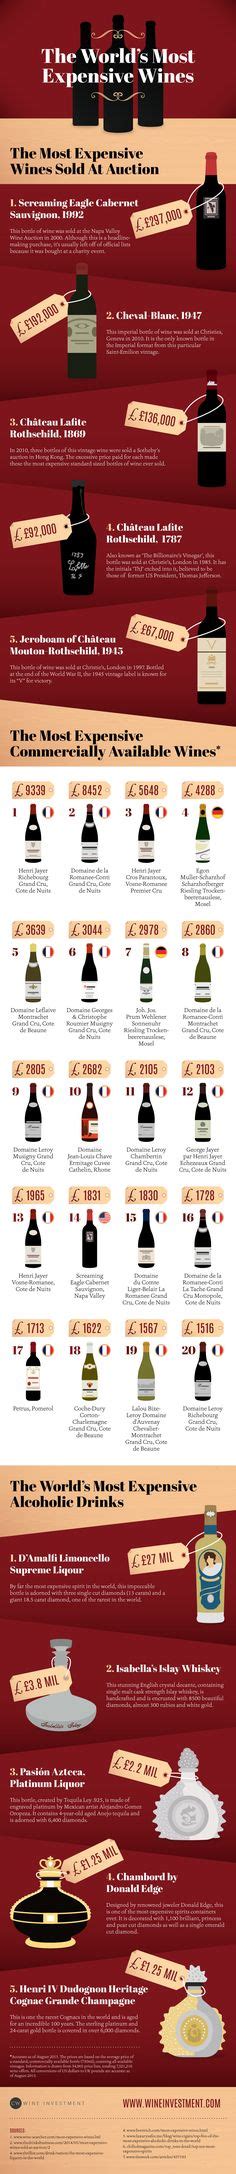 The Most Expensive Wines in the World (Infographic) Expensive Wine, Most Expensive, Wine And ...